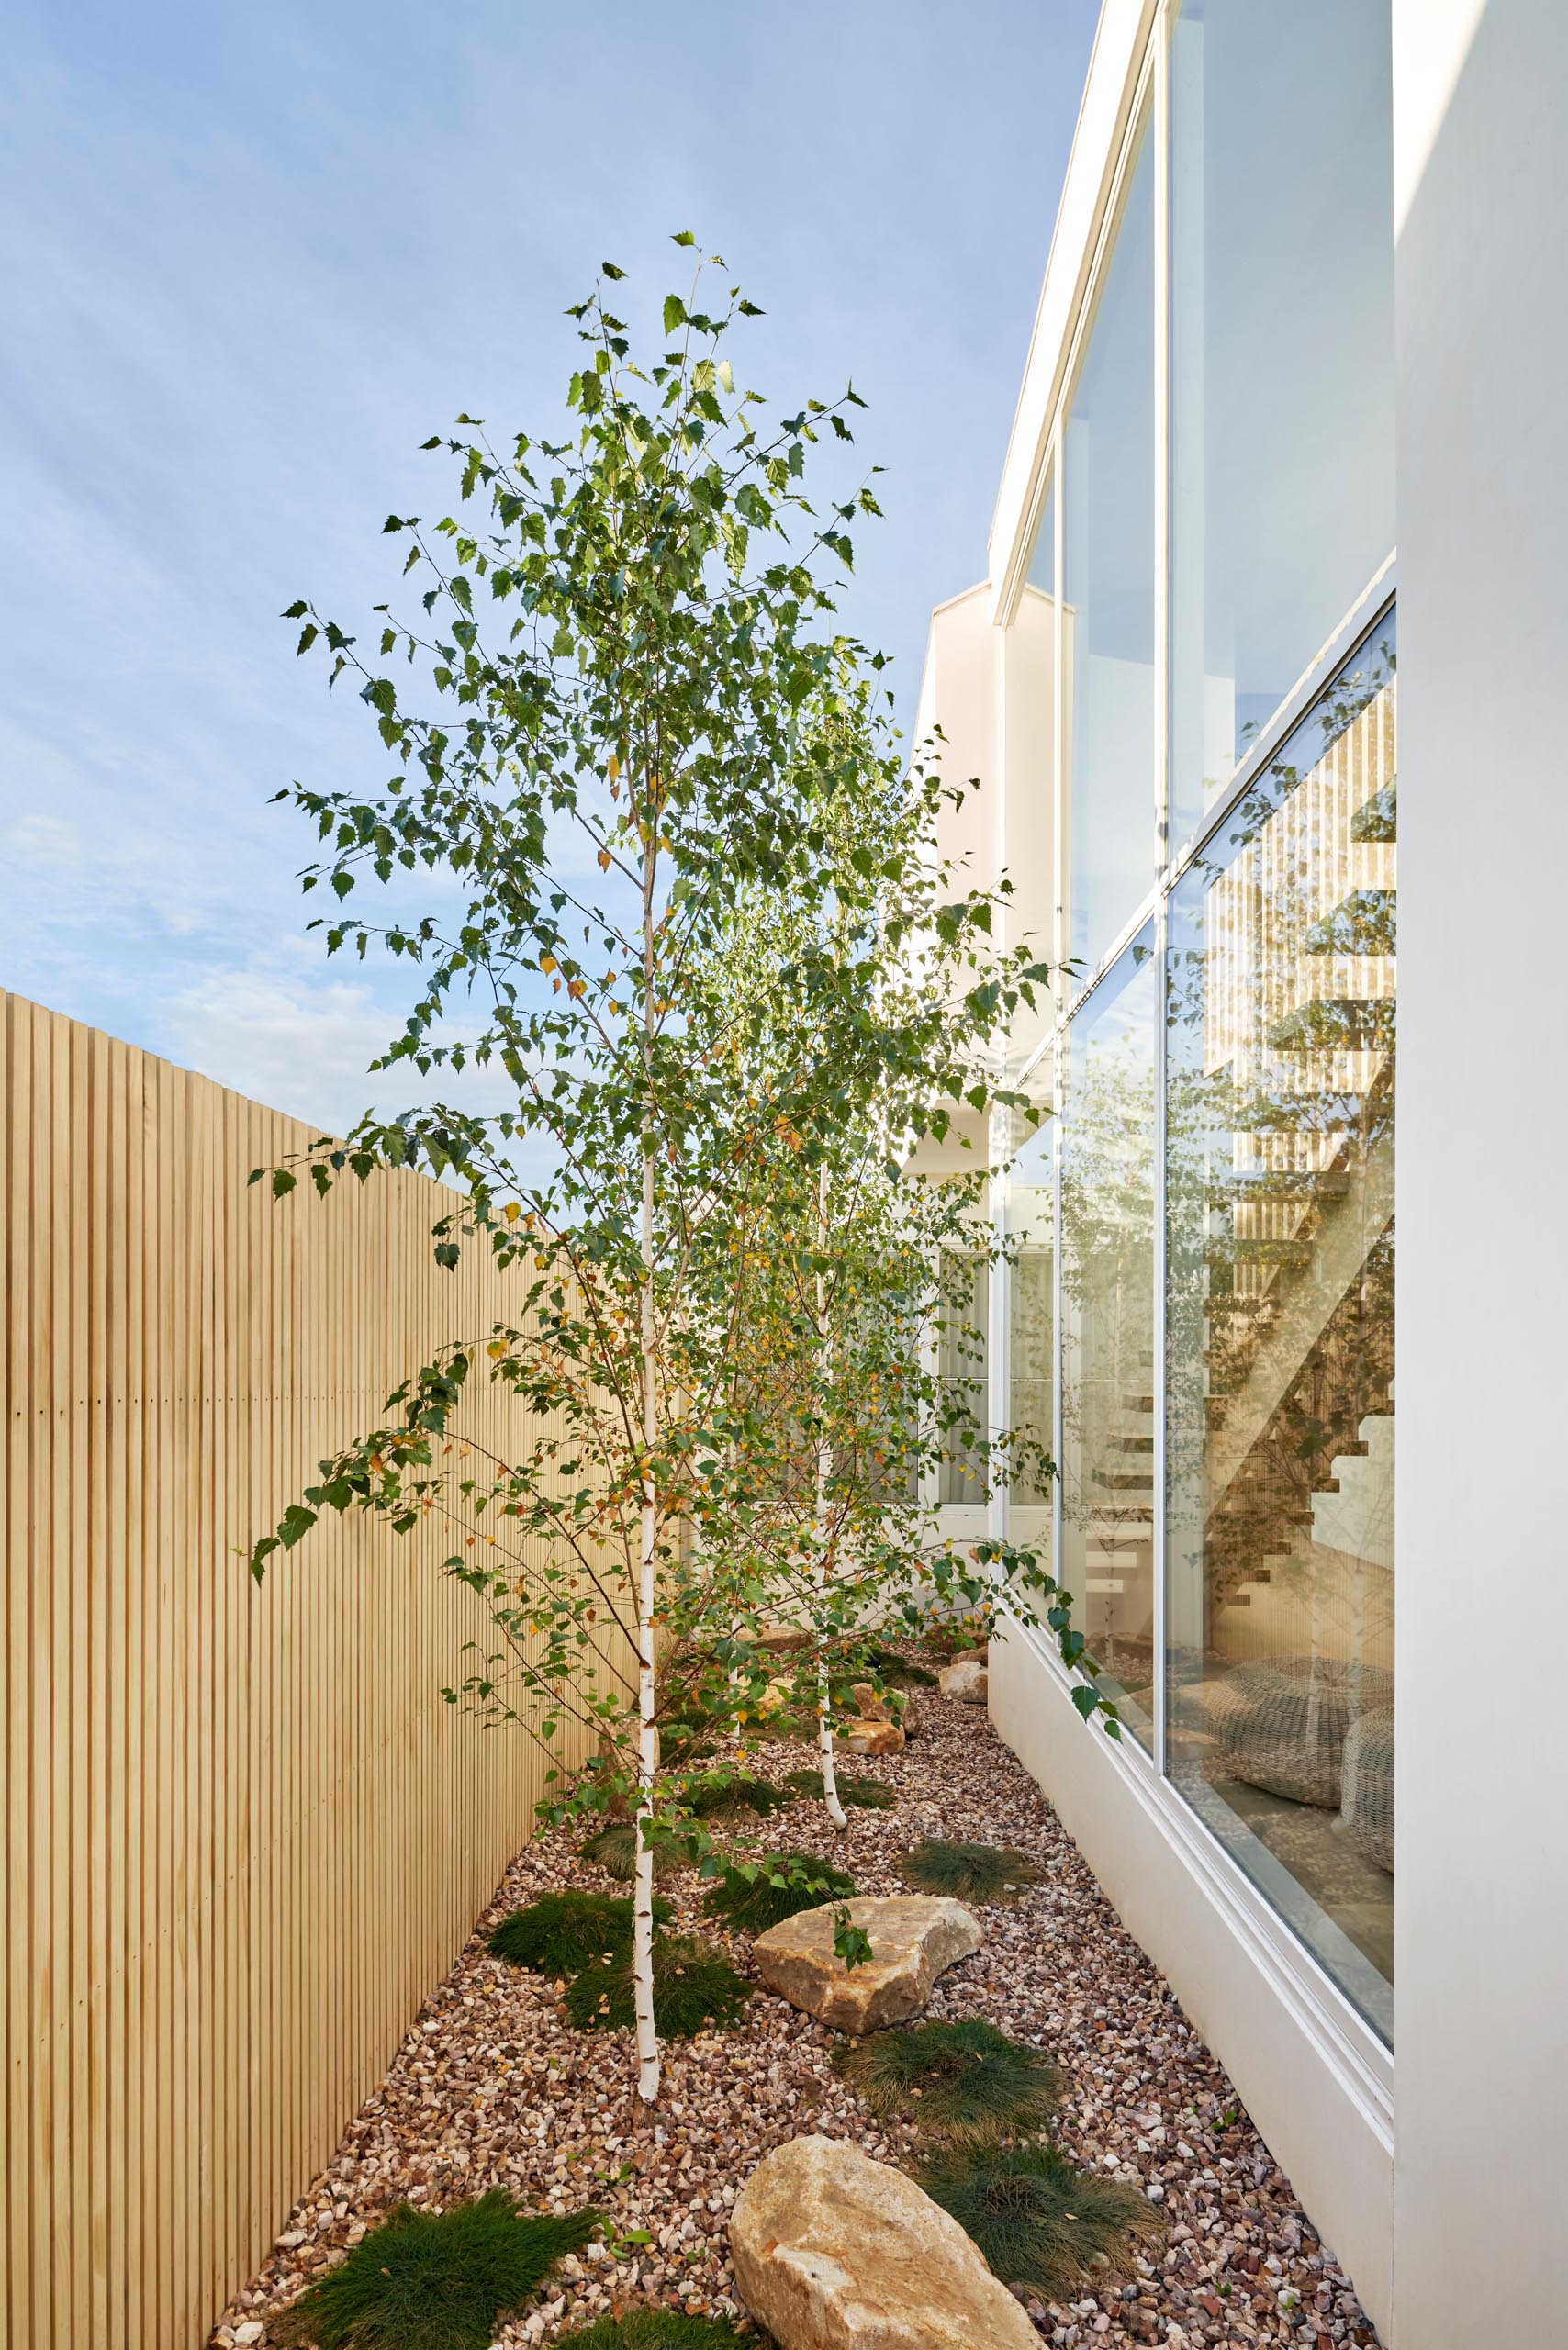 A modern house with a side garden that features a light wood fence, stones, grasses, and trees.